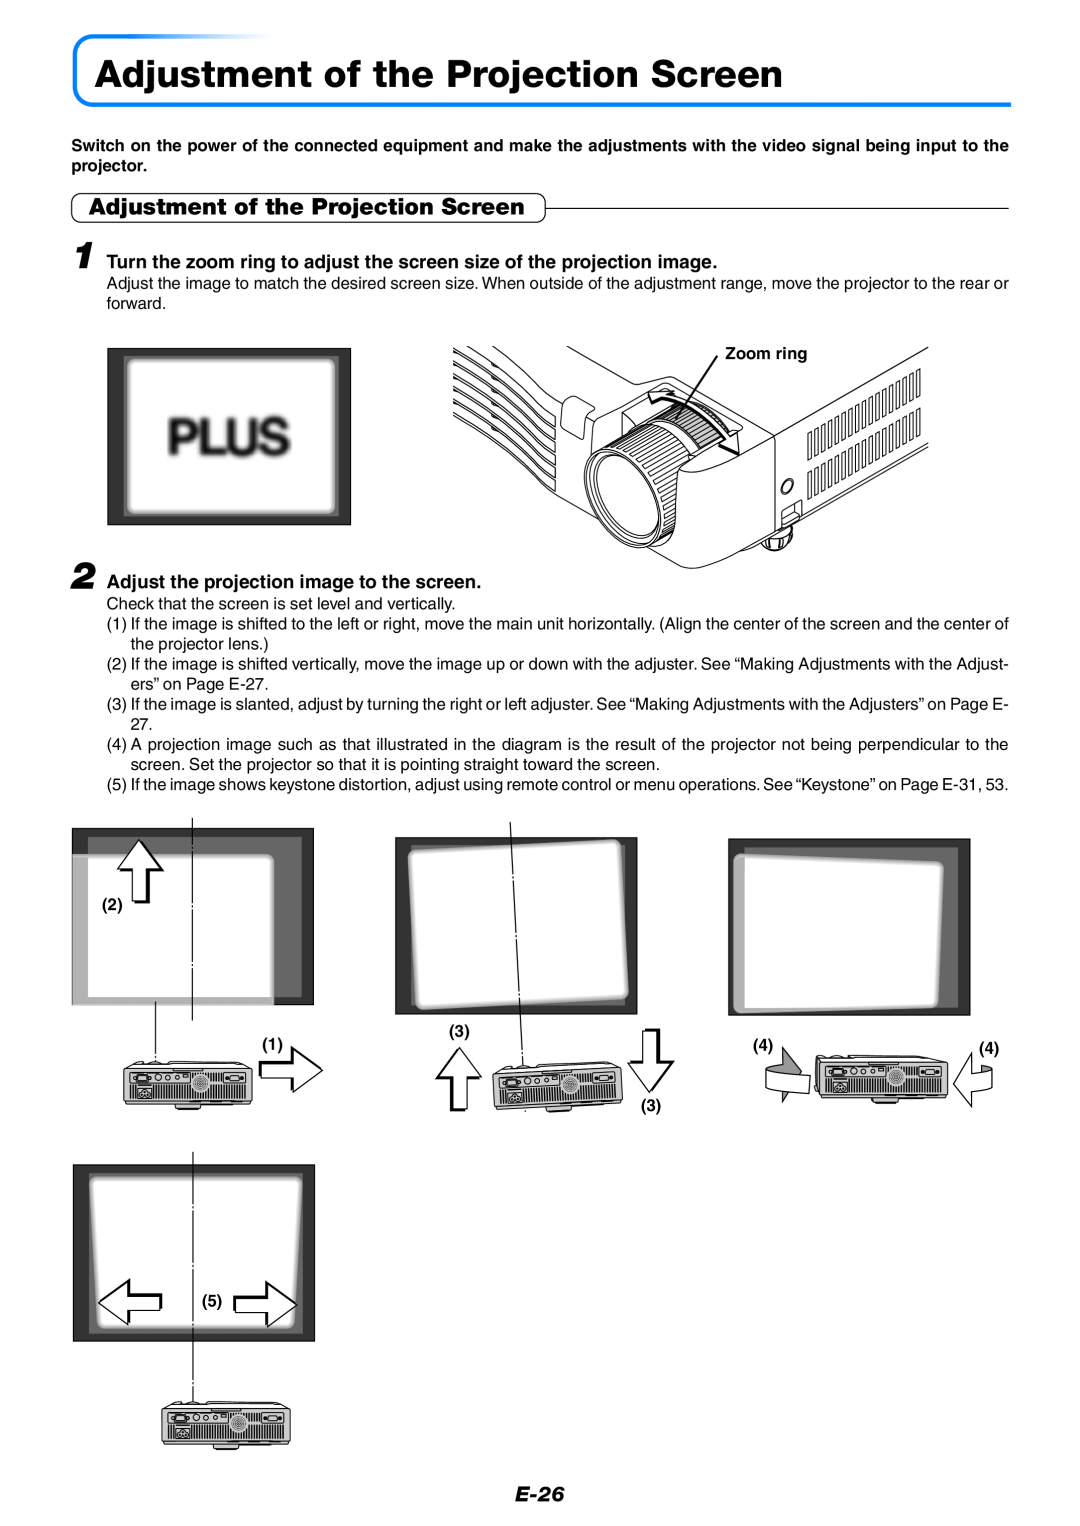 PLUS Vision U5-632, U5-532 Adjustment of the Projection Screen, E-26, Adjust the projection image to the screen, Zoom ring 